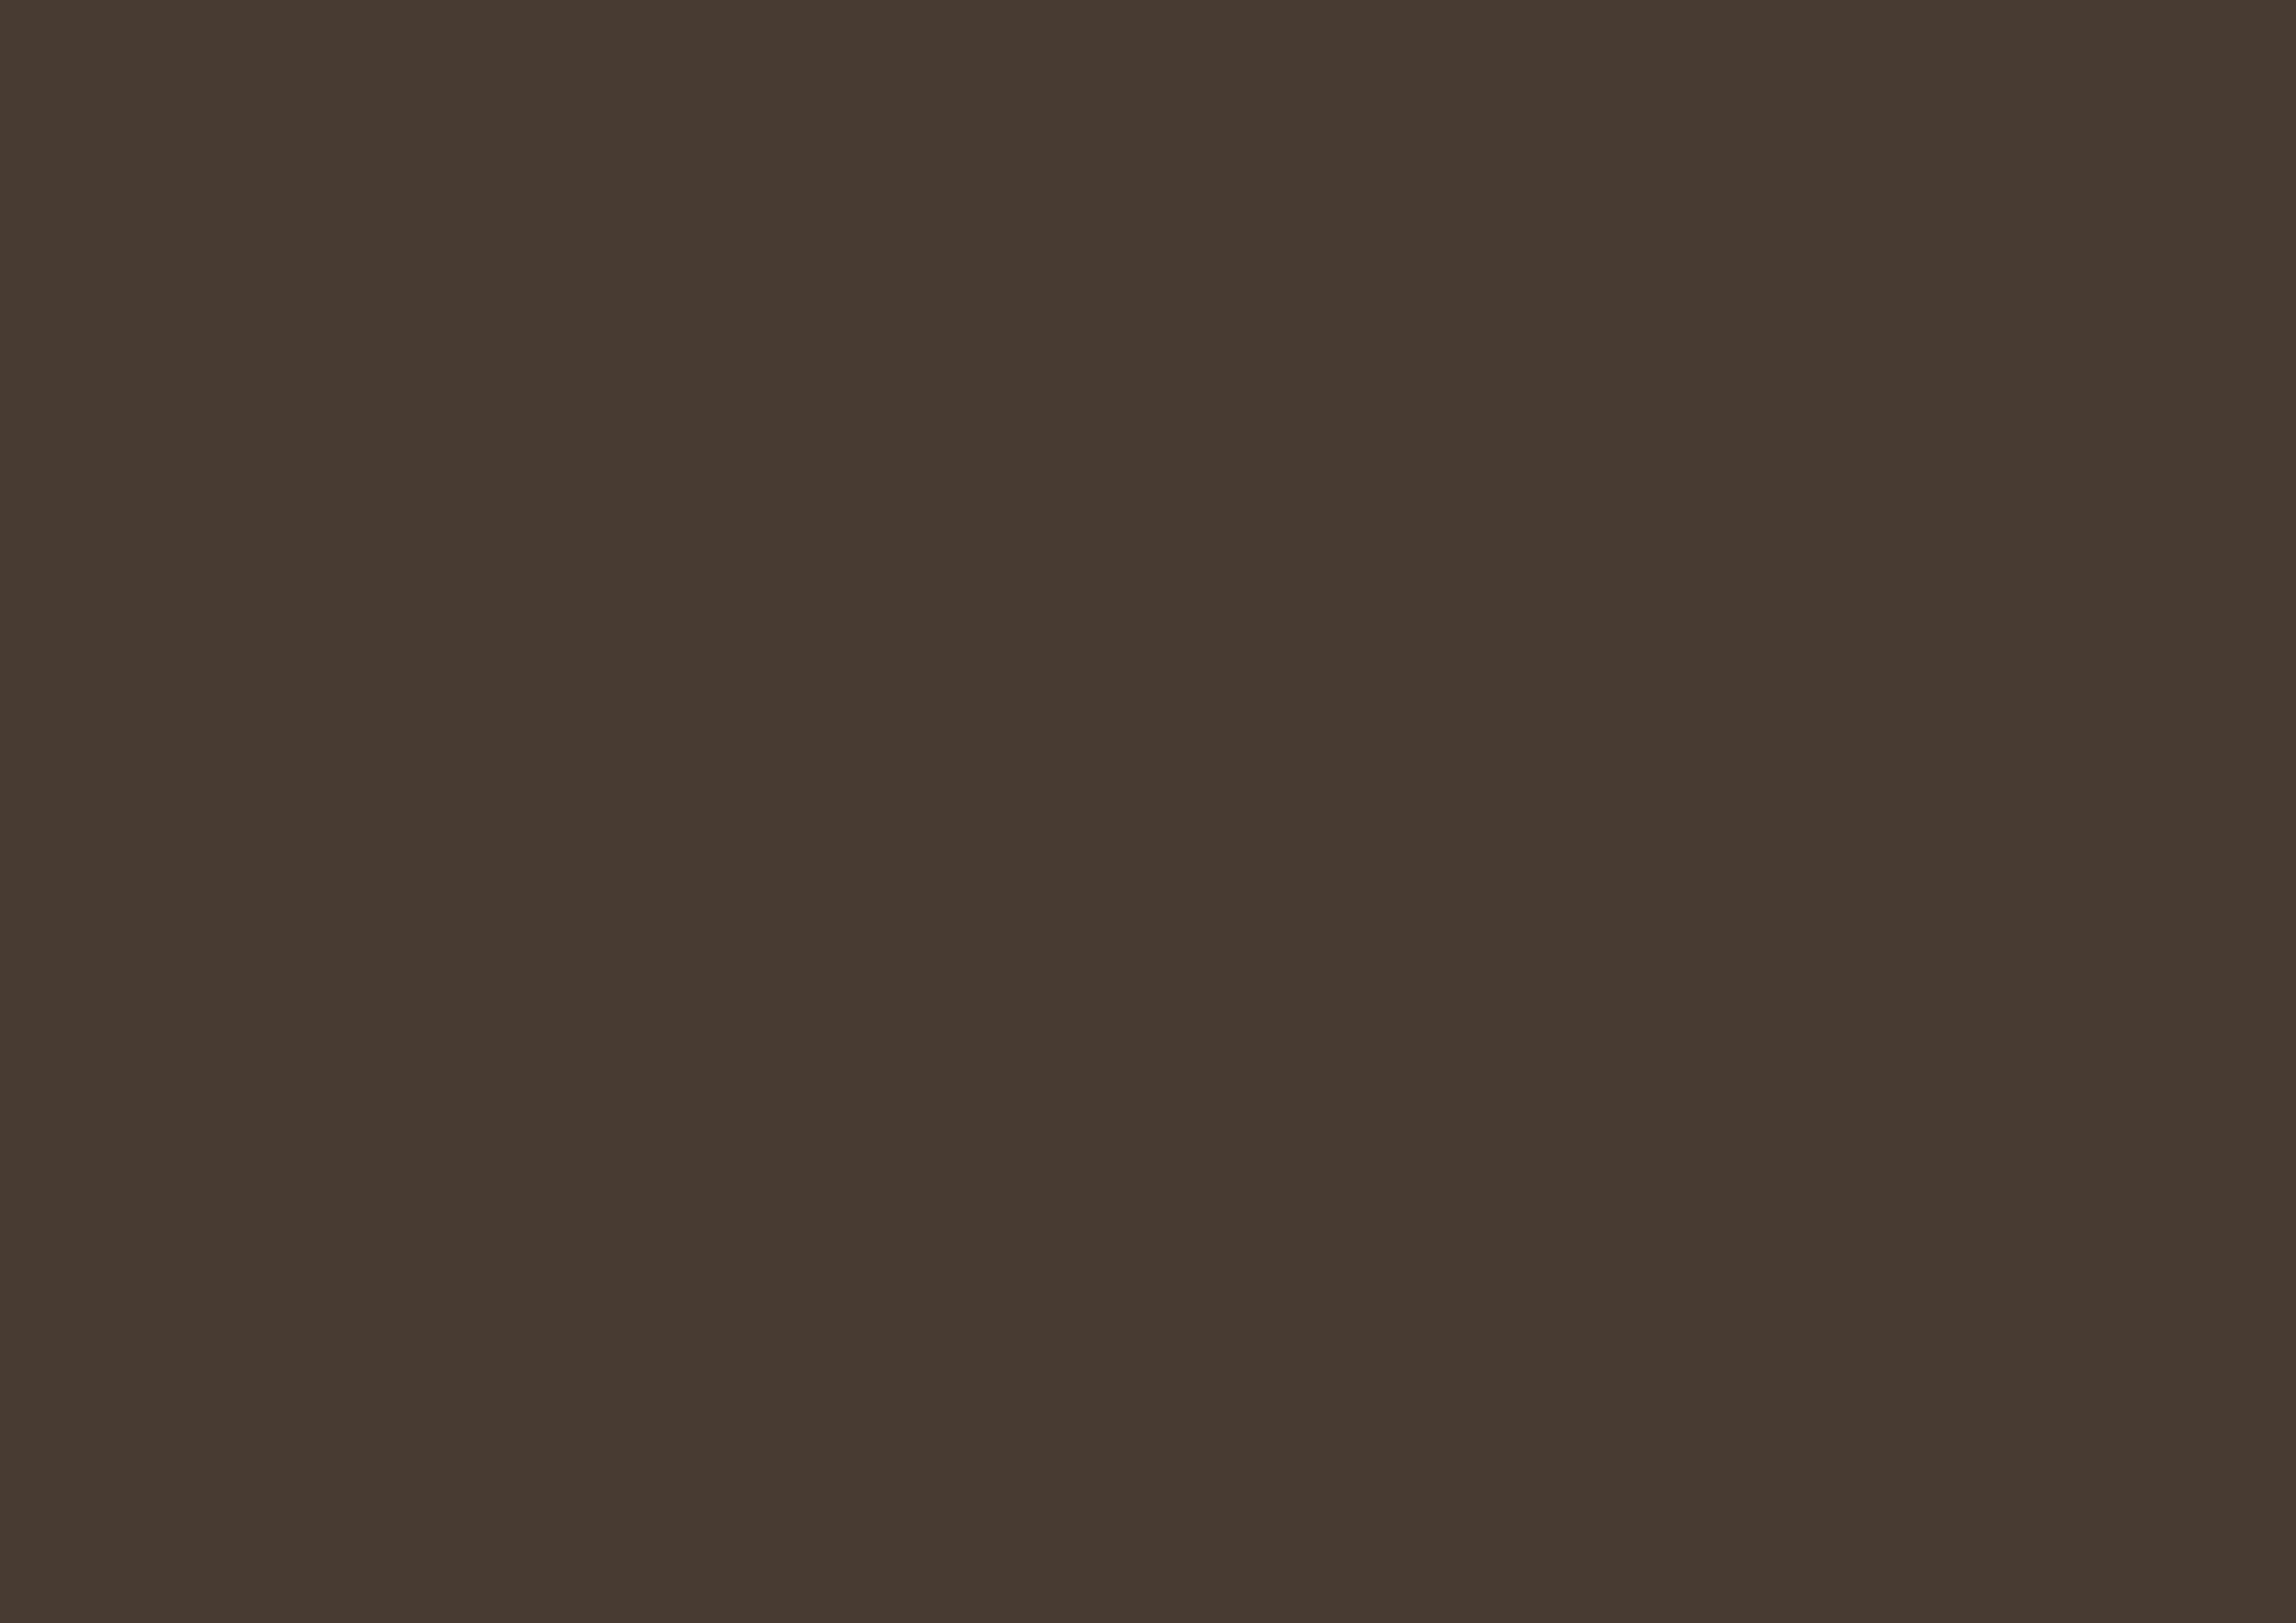 3508x2480 Taupe Solid Color Background